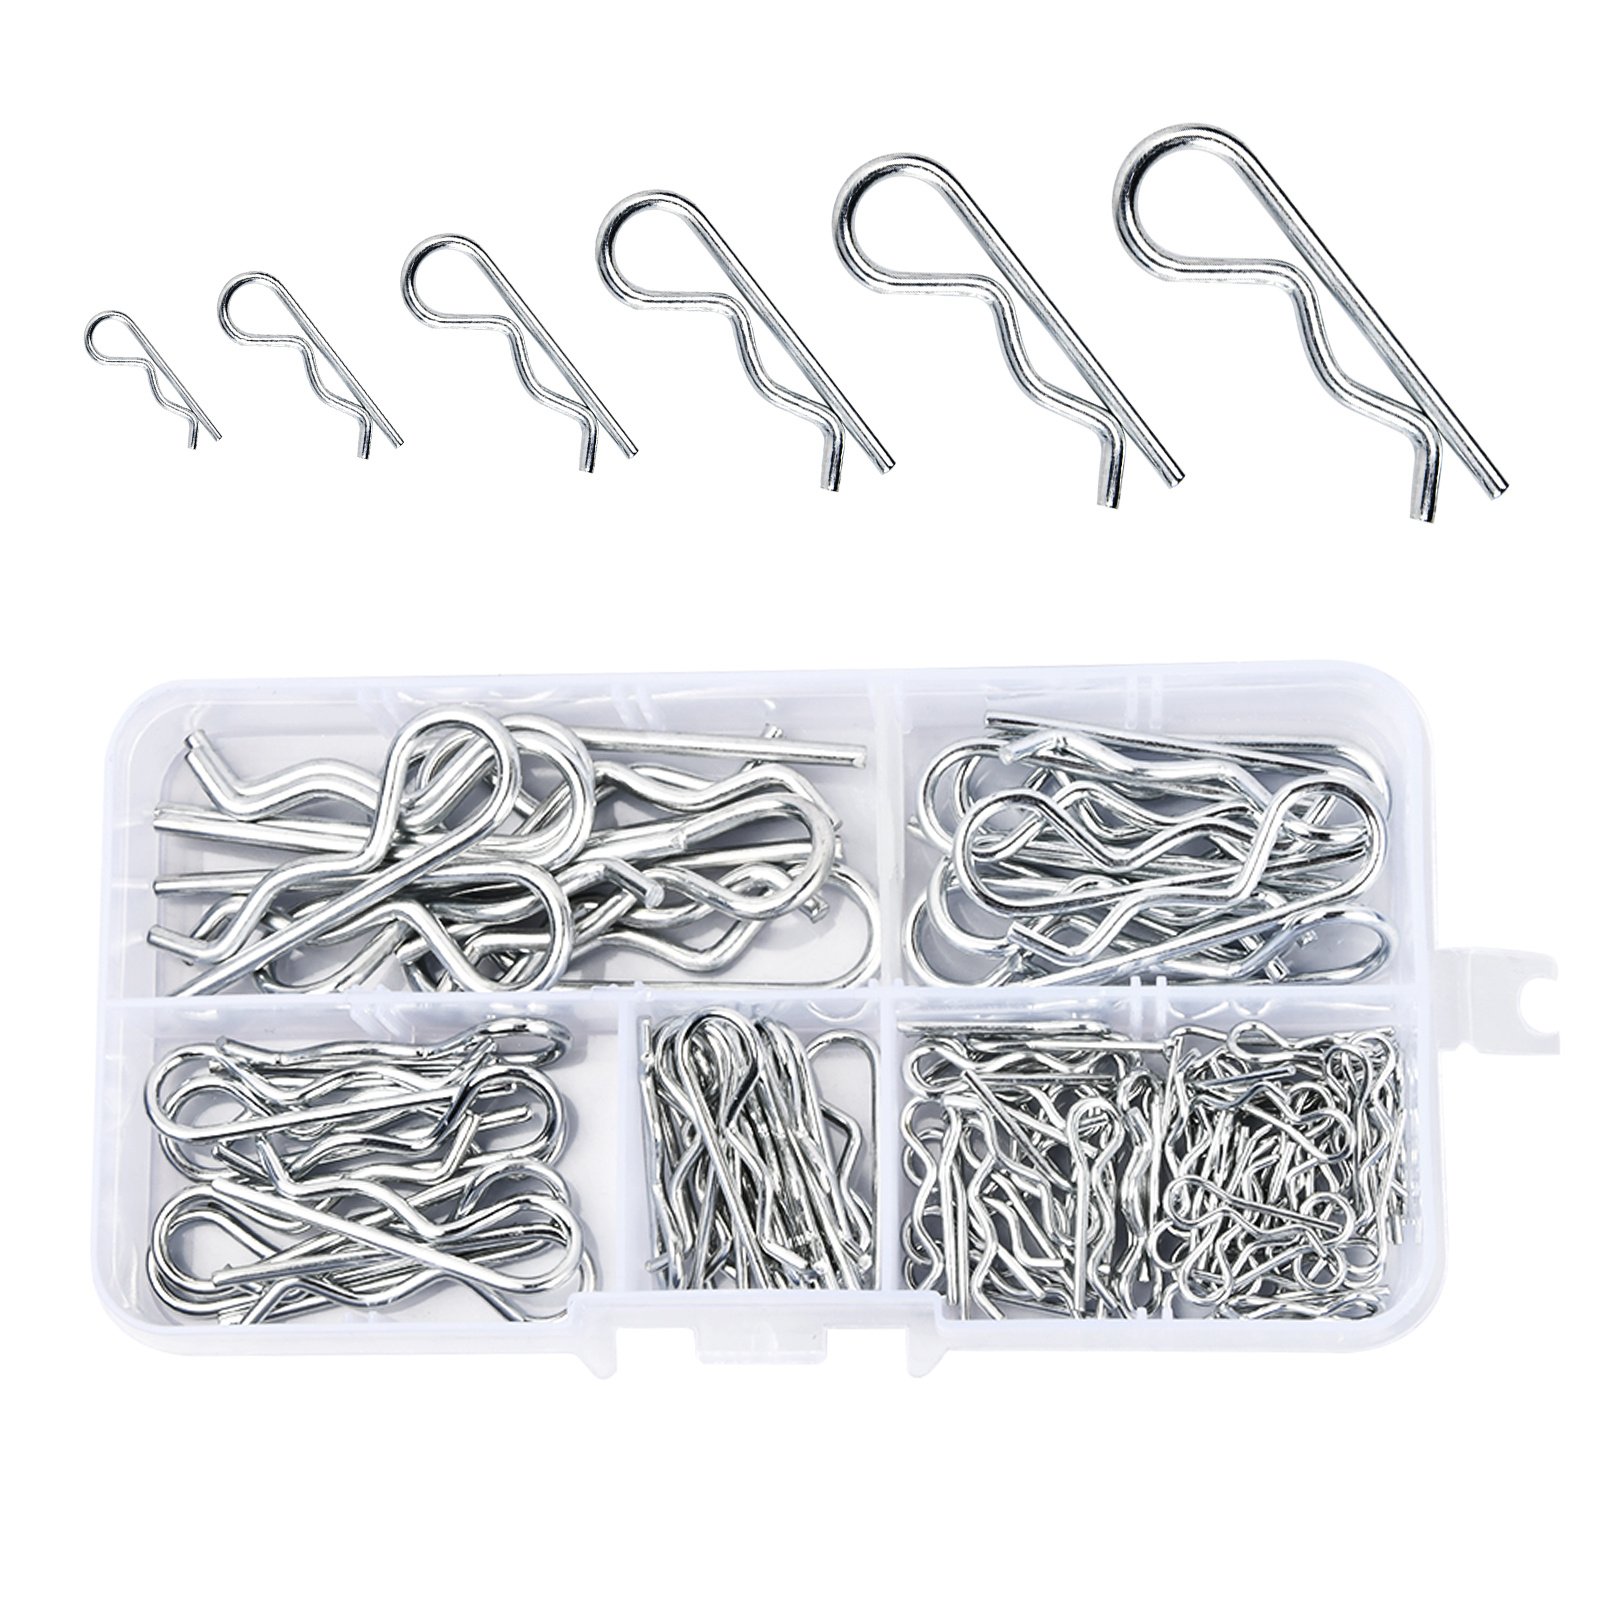 100pcs Cotter Pins Spring Connectors - Buy Now at Our Store